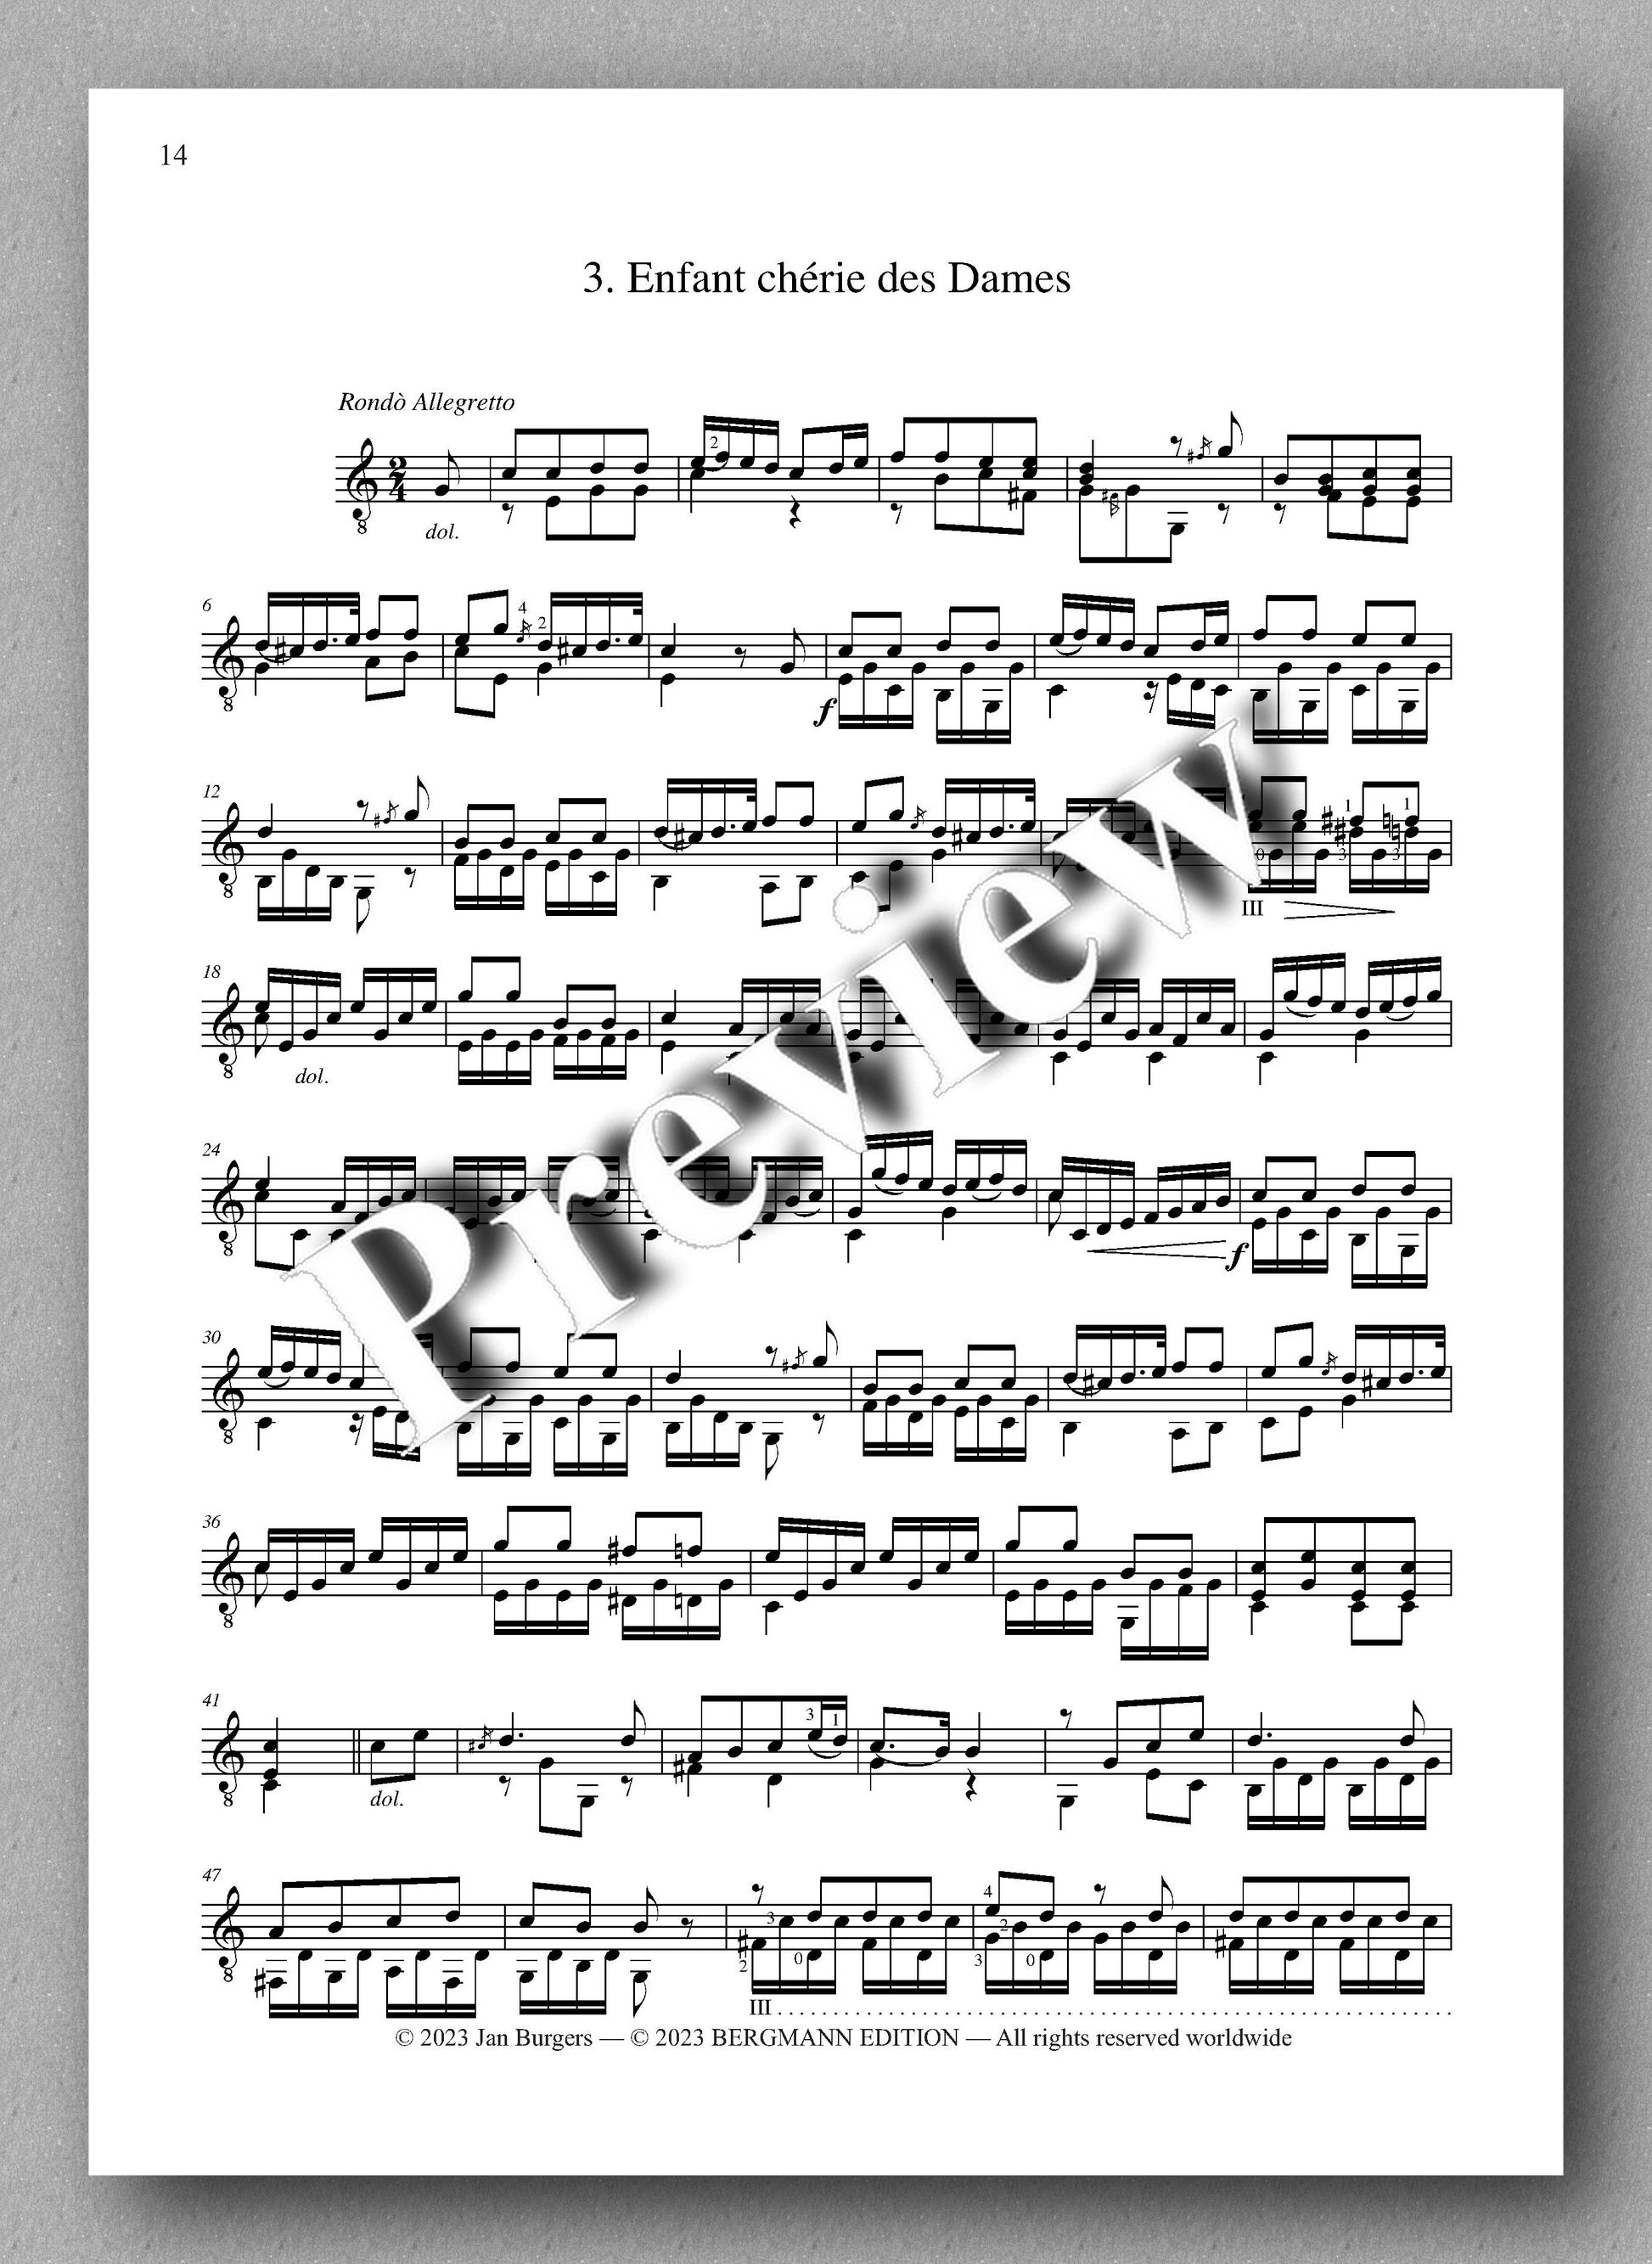 Molino, Collected Works for Guitar Solo, Vol. 19 - preview of the music score 3